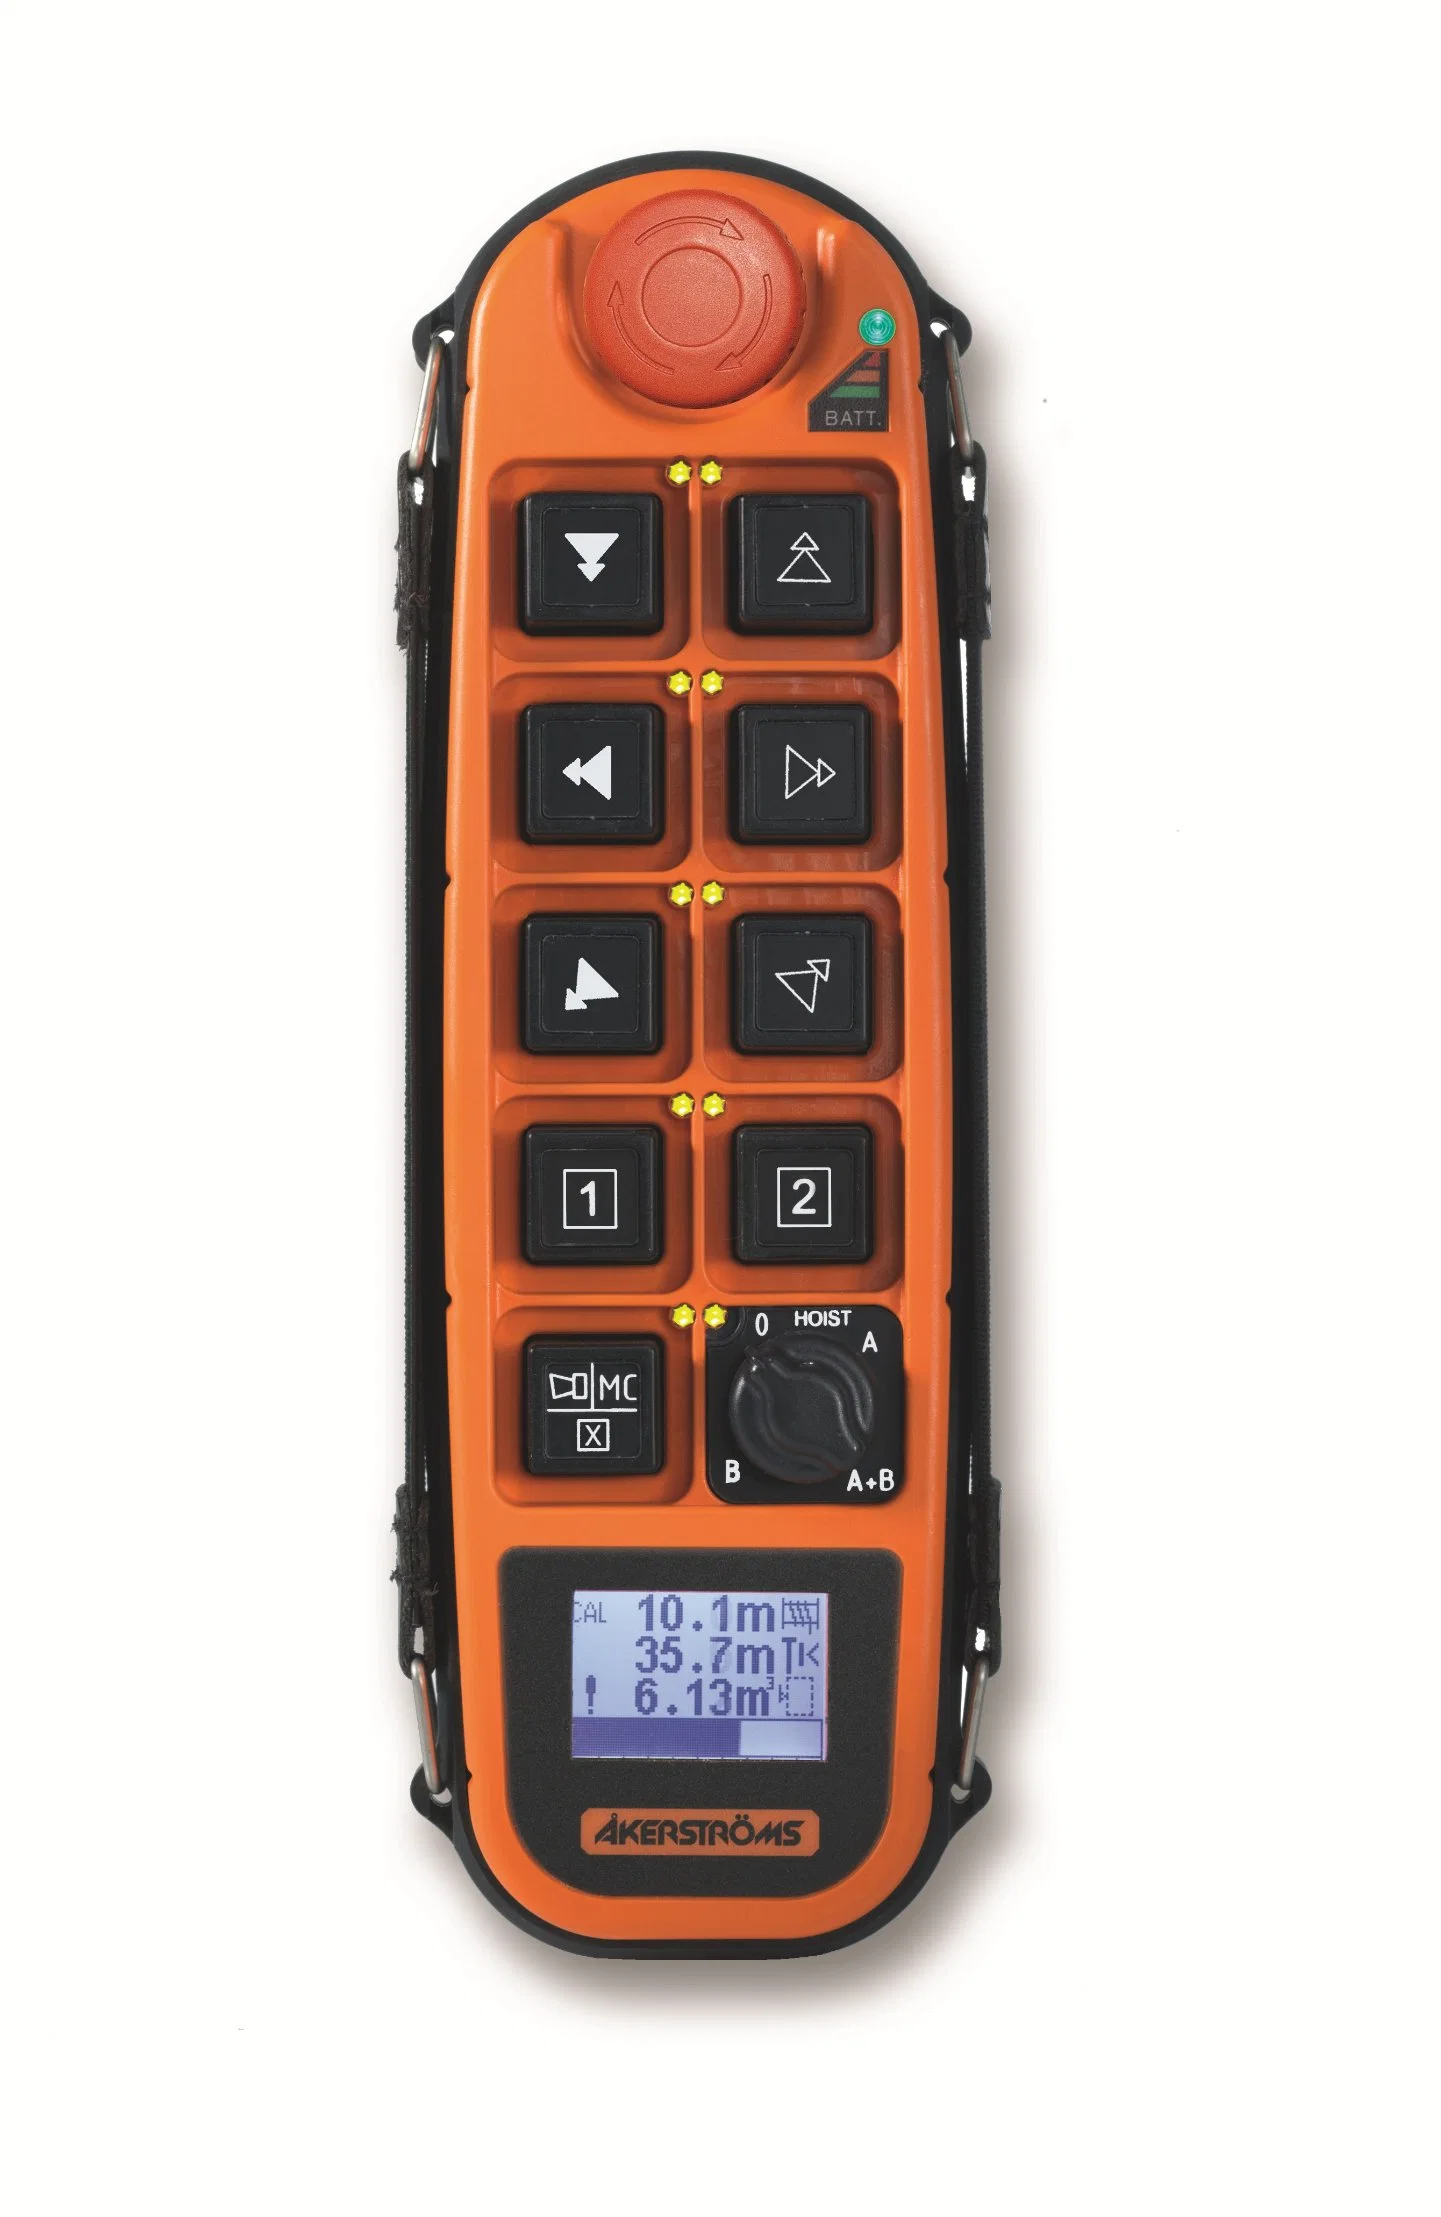 Akerstroms Brand Industrial Remote Control for Crane Winch Use Wireless Remote Control